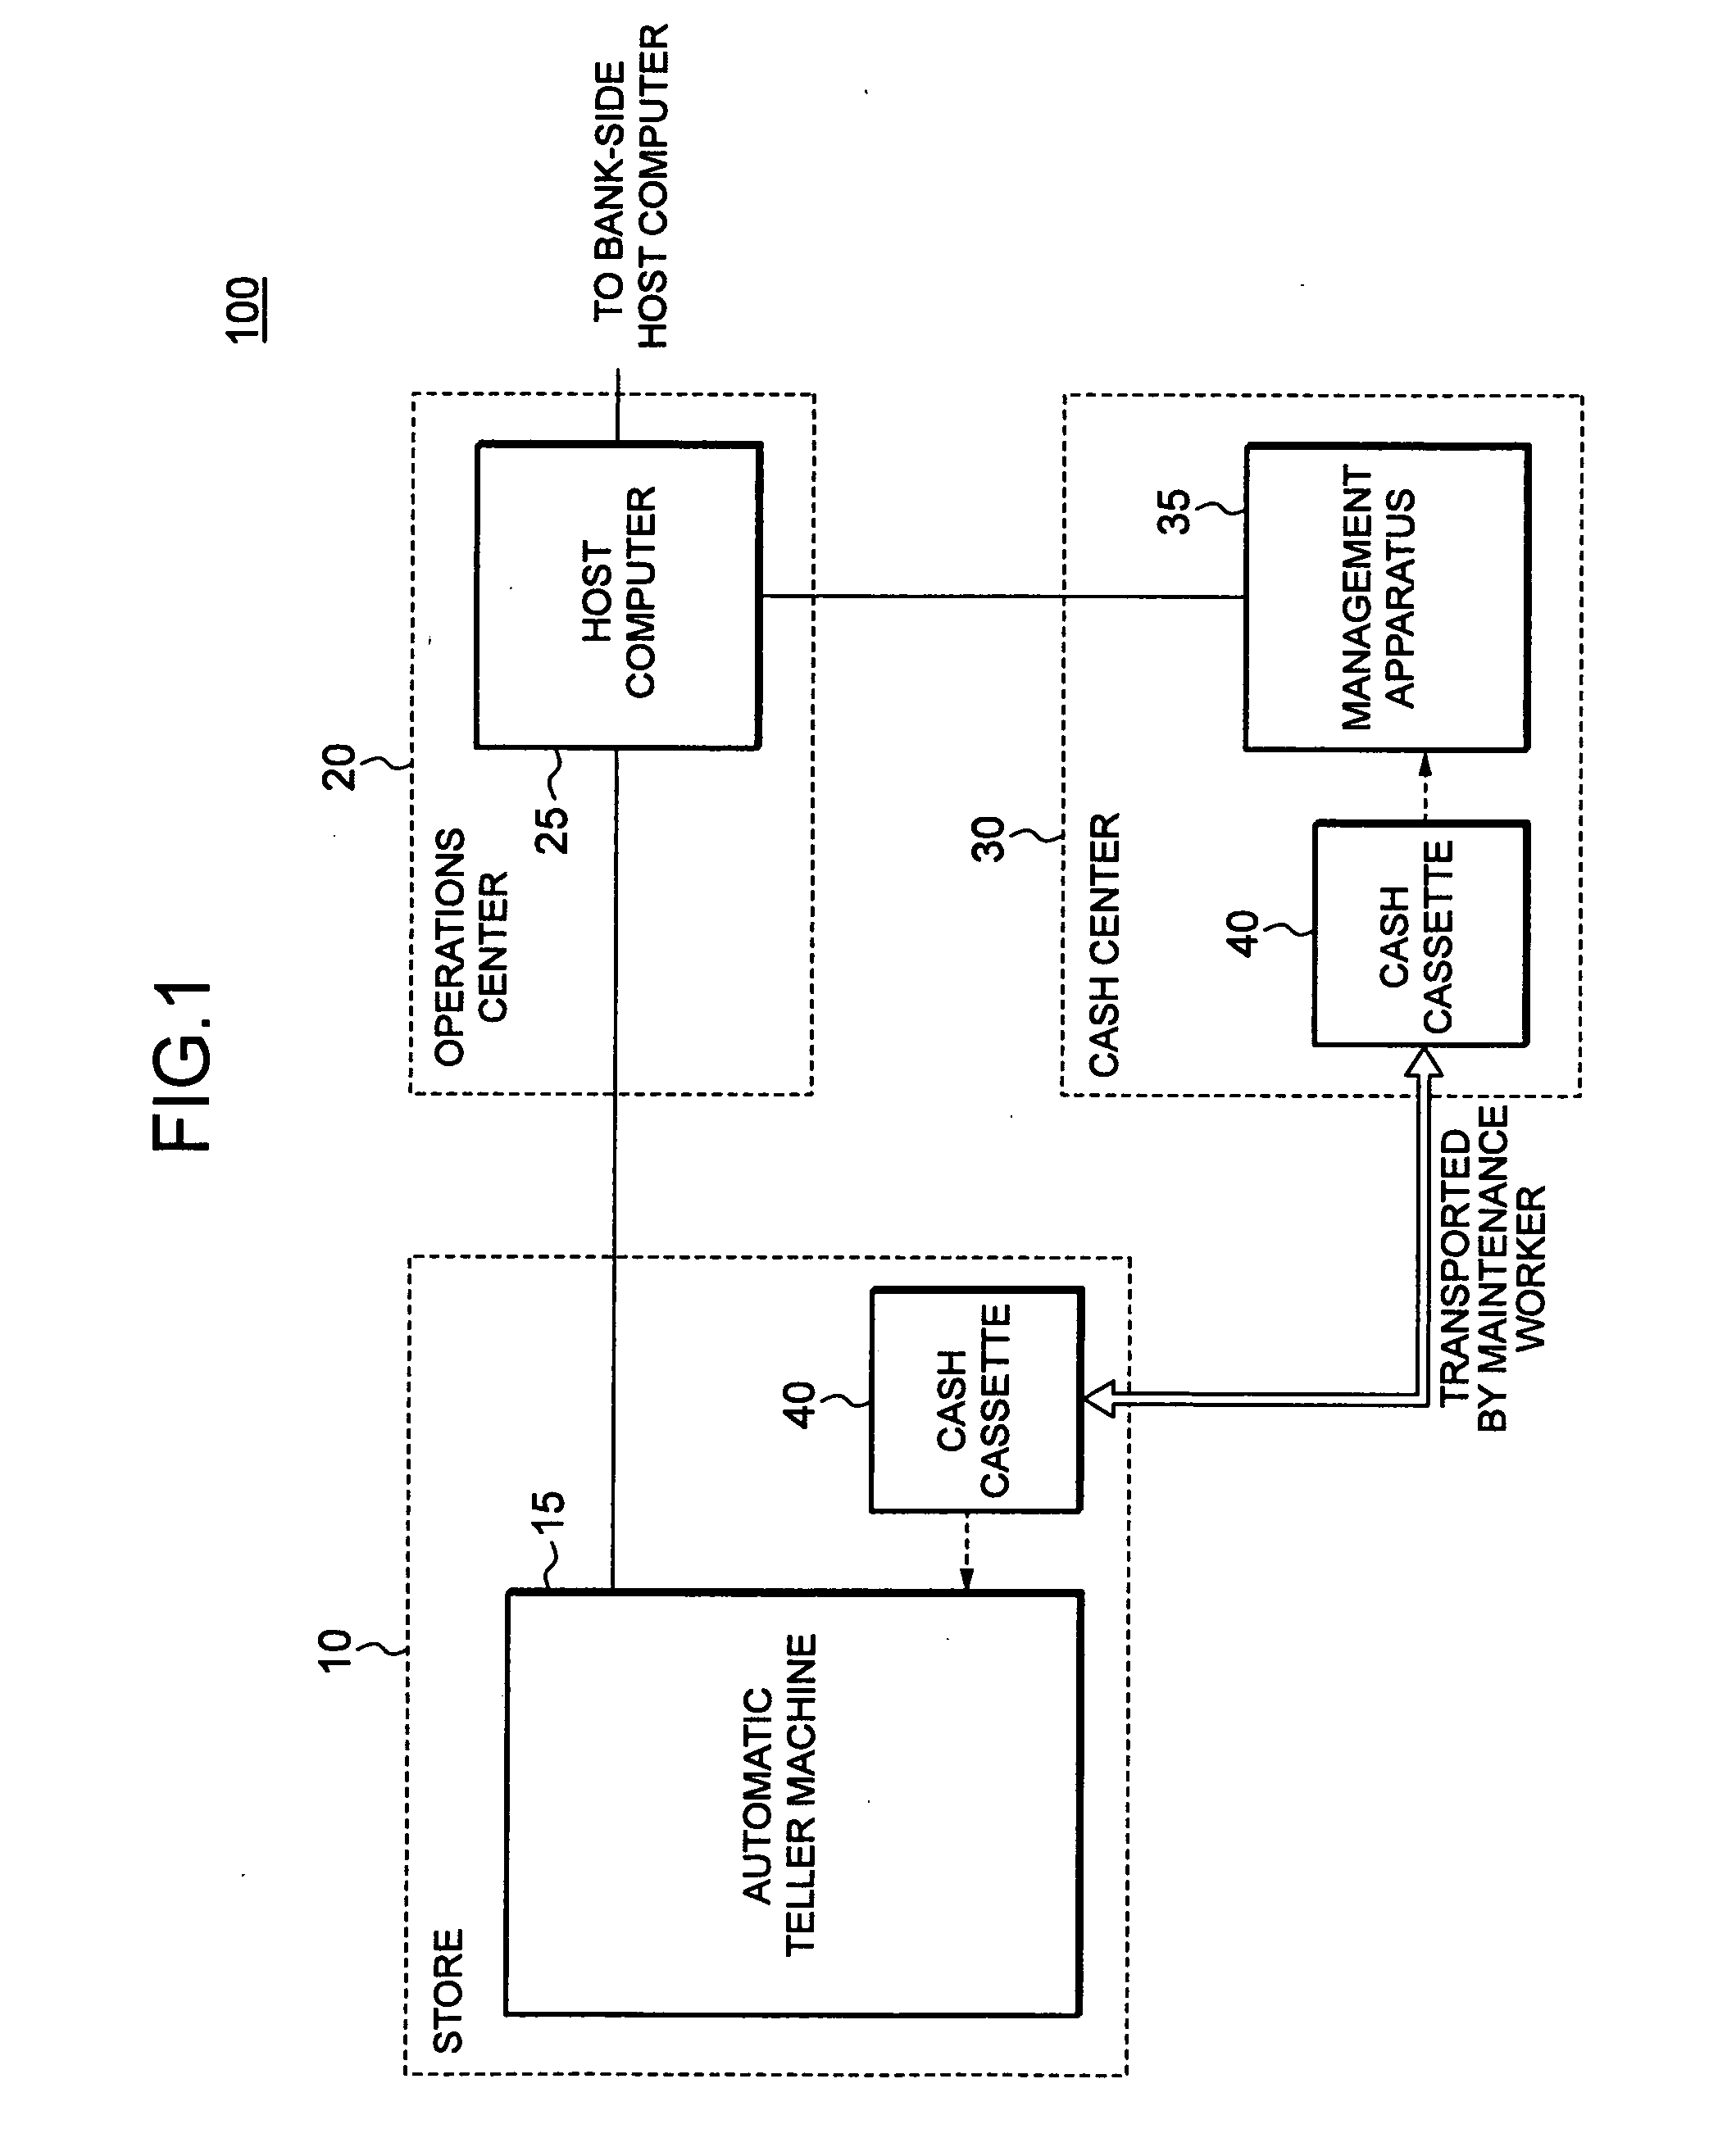 Method and system for automatic teller machine cash management